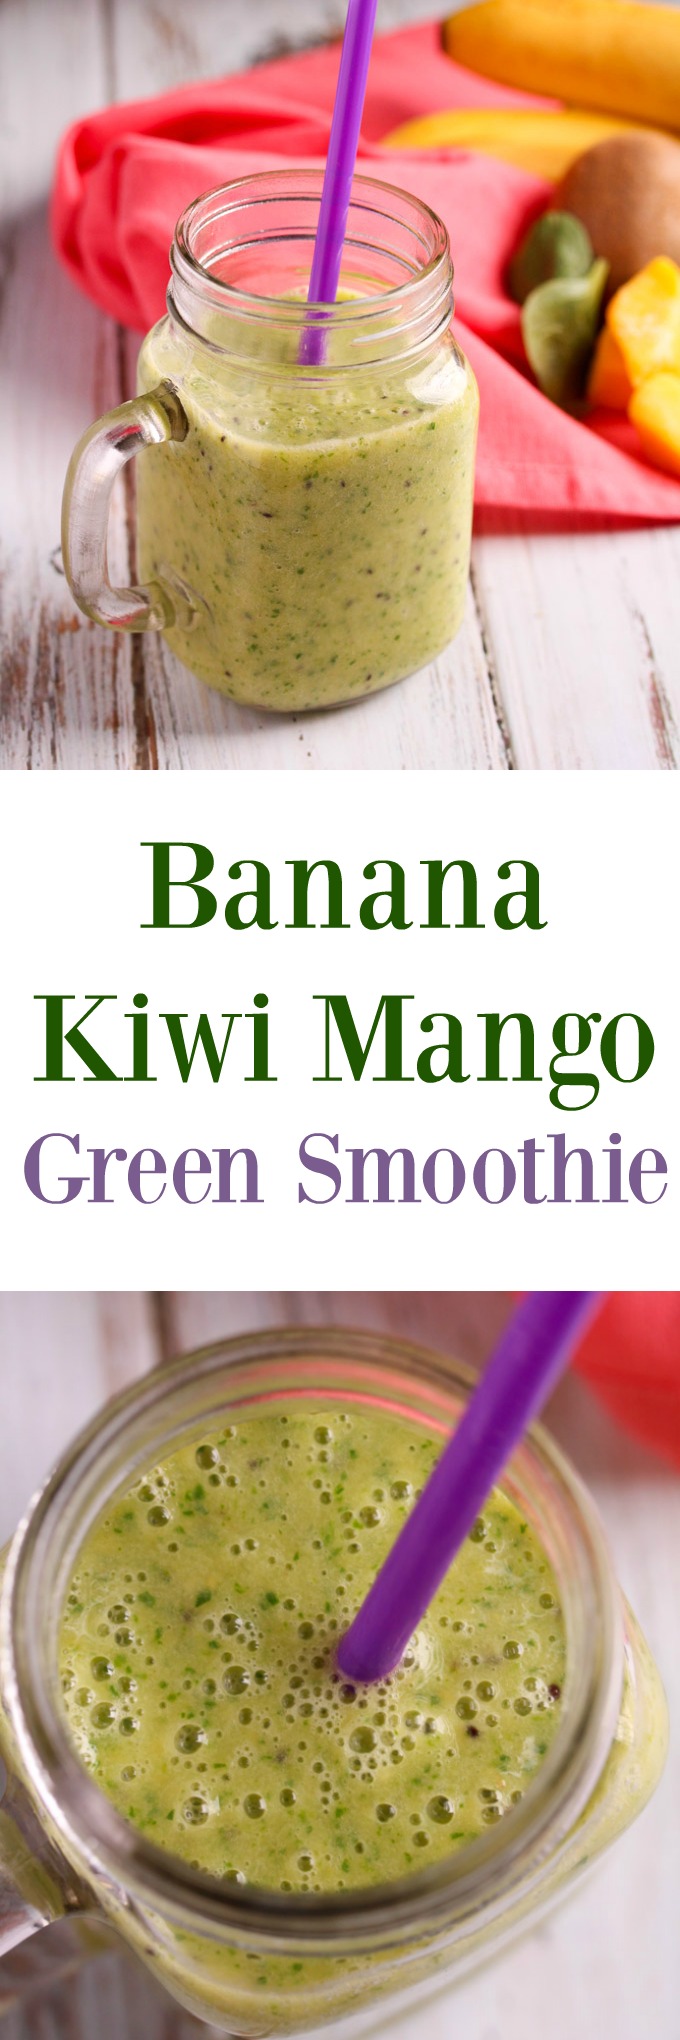 Delicious tropical flavor and dairy free - this banana kiwi mango green smoothie is a great breakfast treat! www.cookingismessy.com